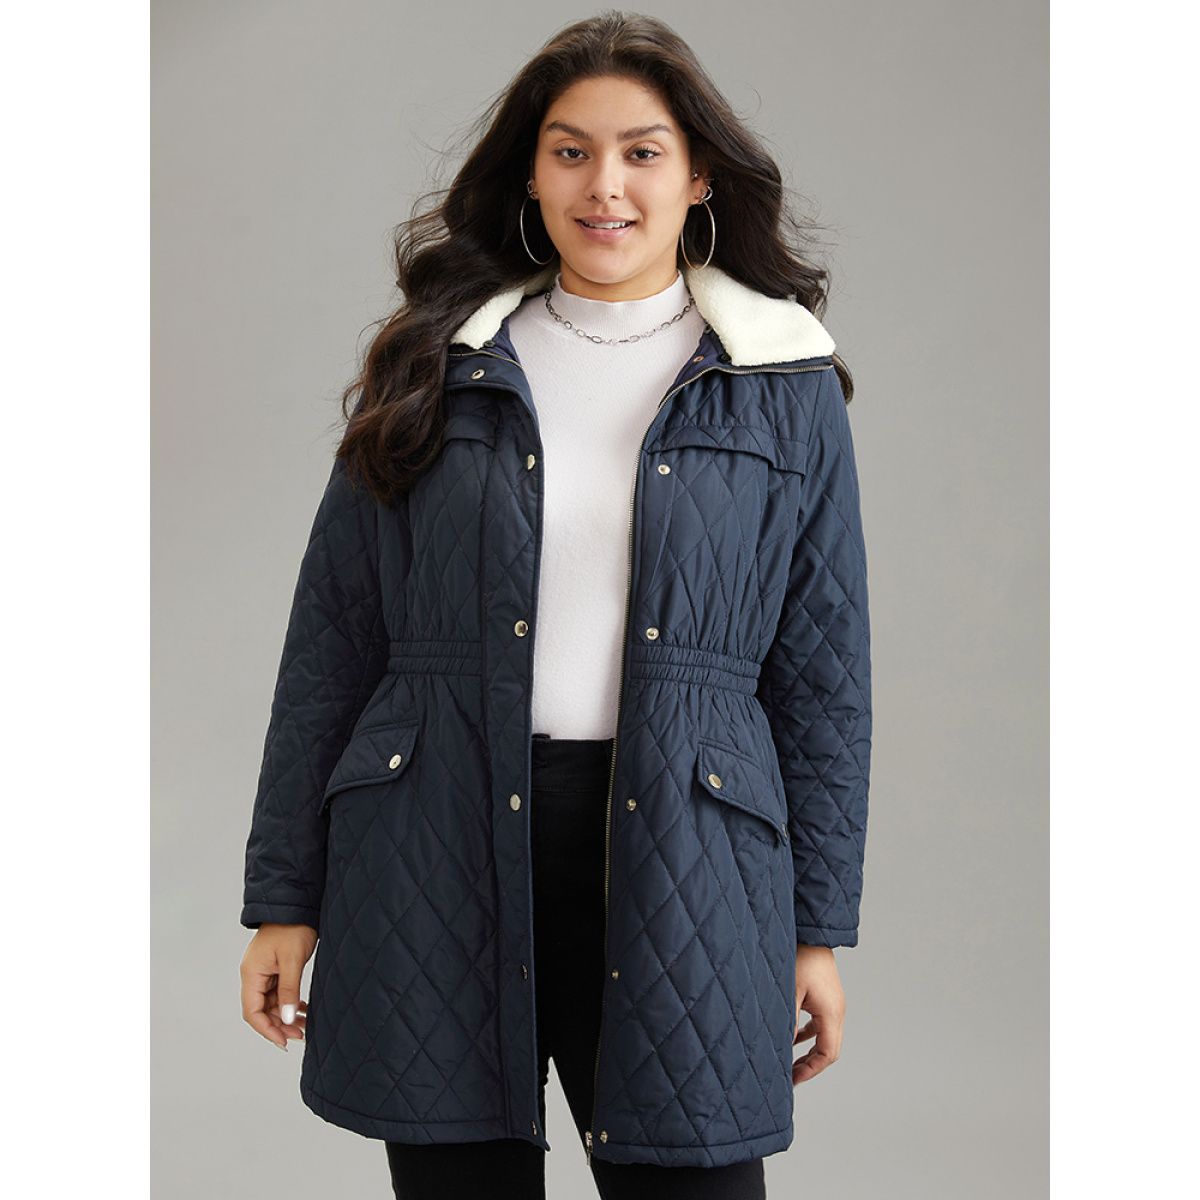 

Plus Size Patchwork Padded Fuzzy Trim Zipper Quilted Coat Women Indigo Casual Lined Ladies Everyday Winter Coats BloomChic